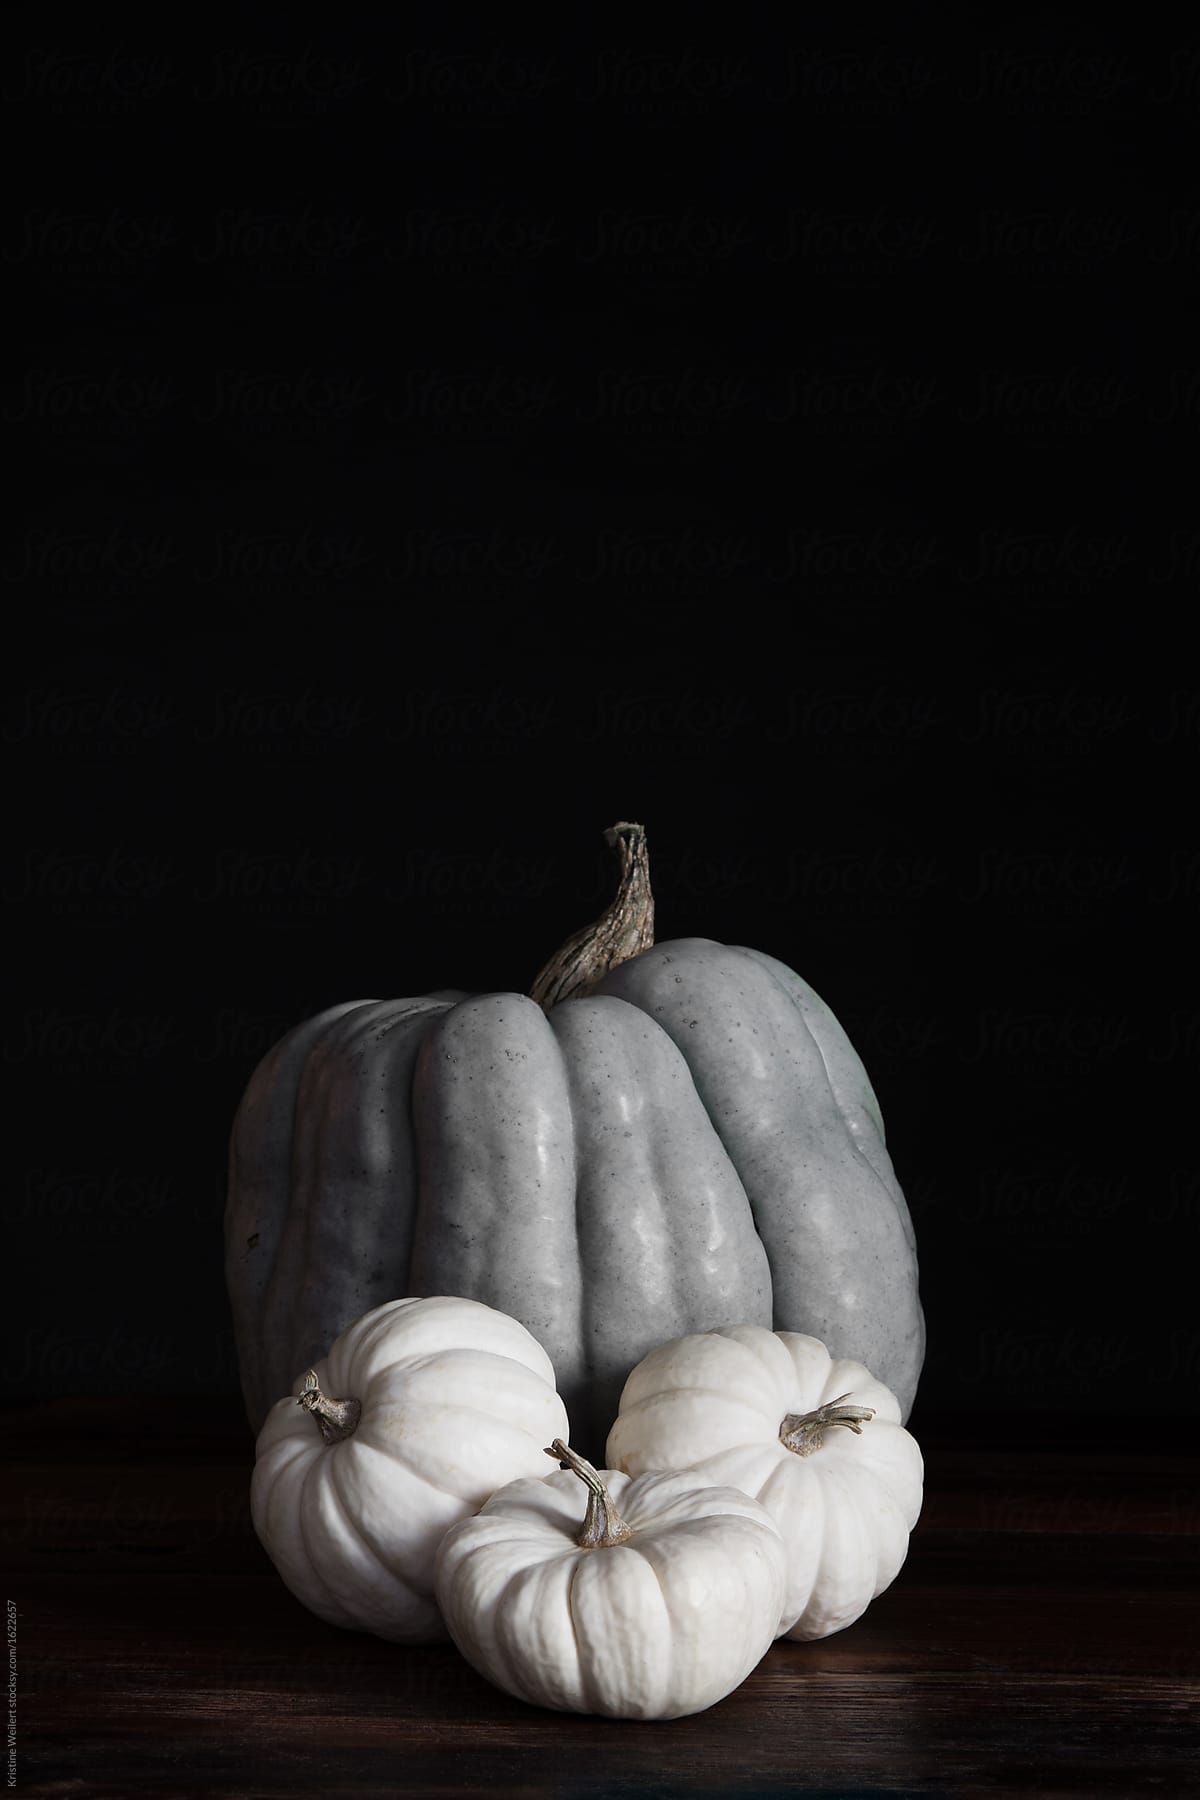 Variety of pumpkins grouped on table with dark background